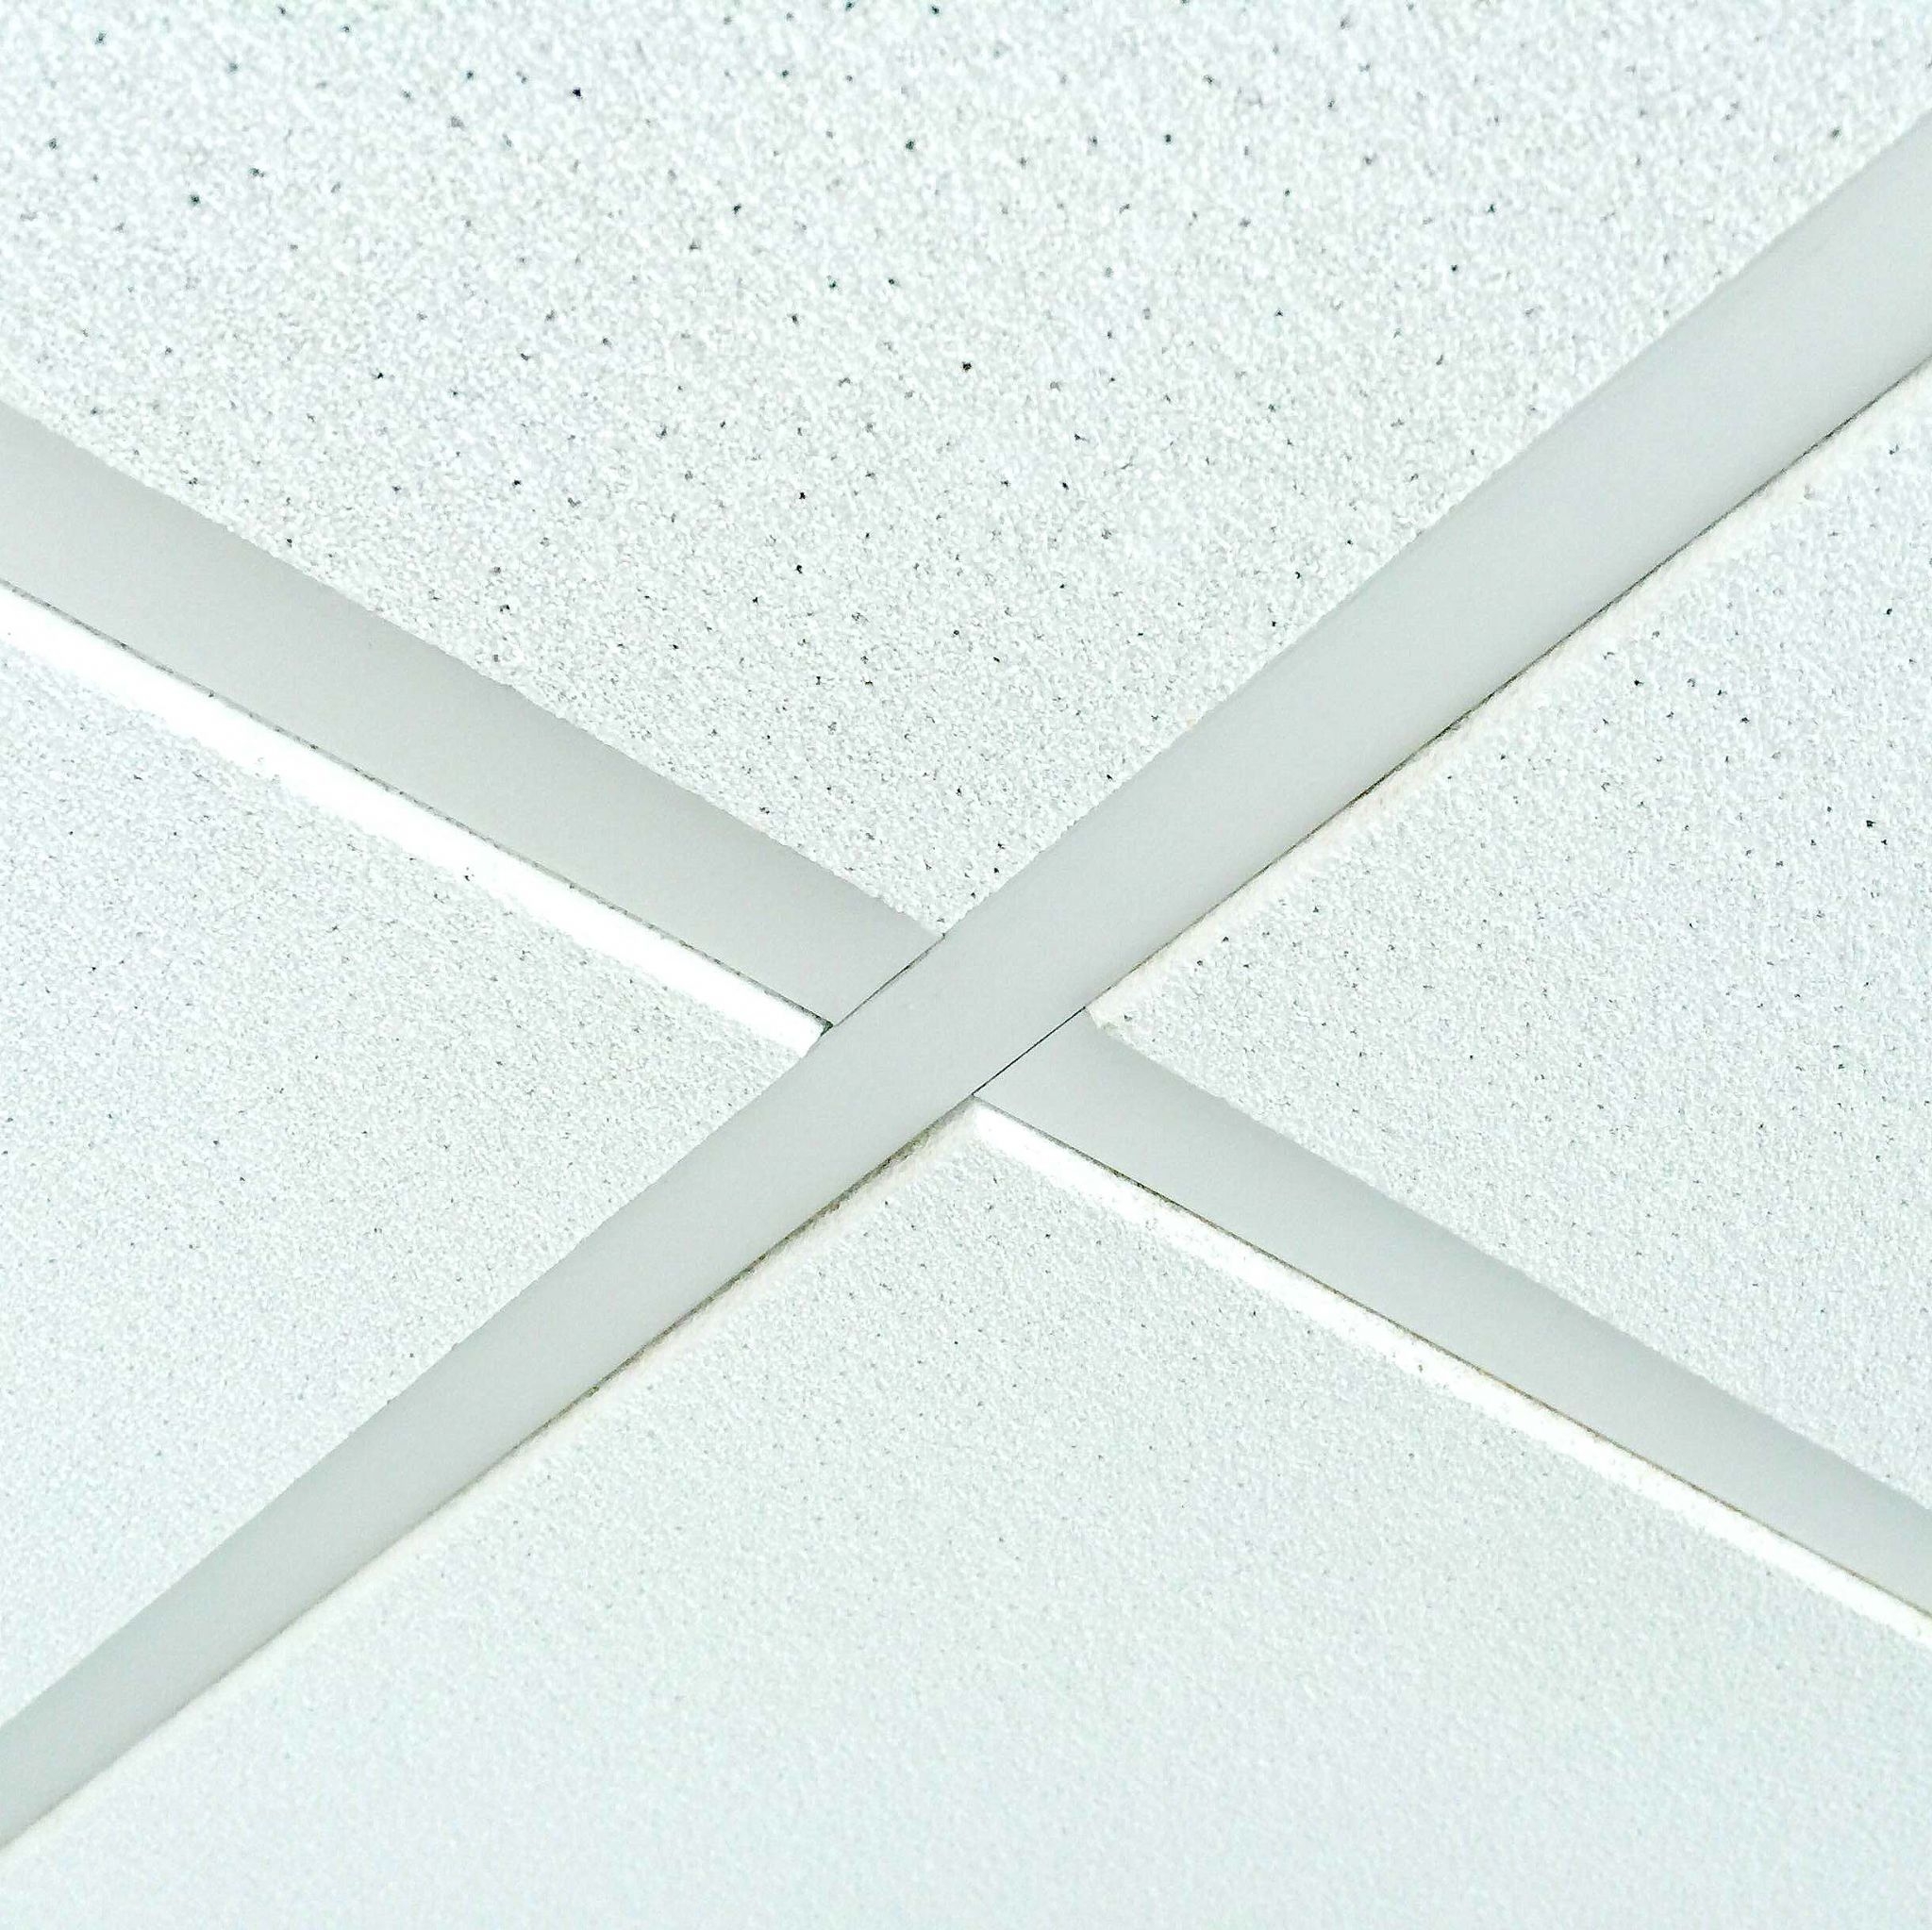 Permalink to Armstrong Tegular Edge Ceiling Tiles